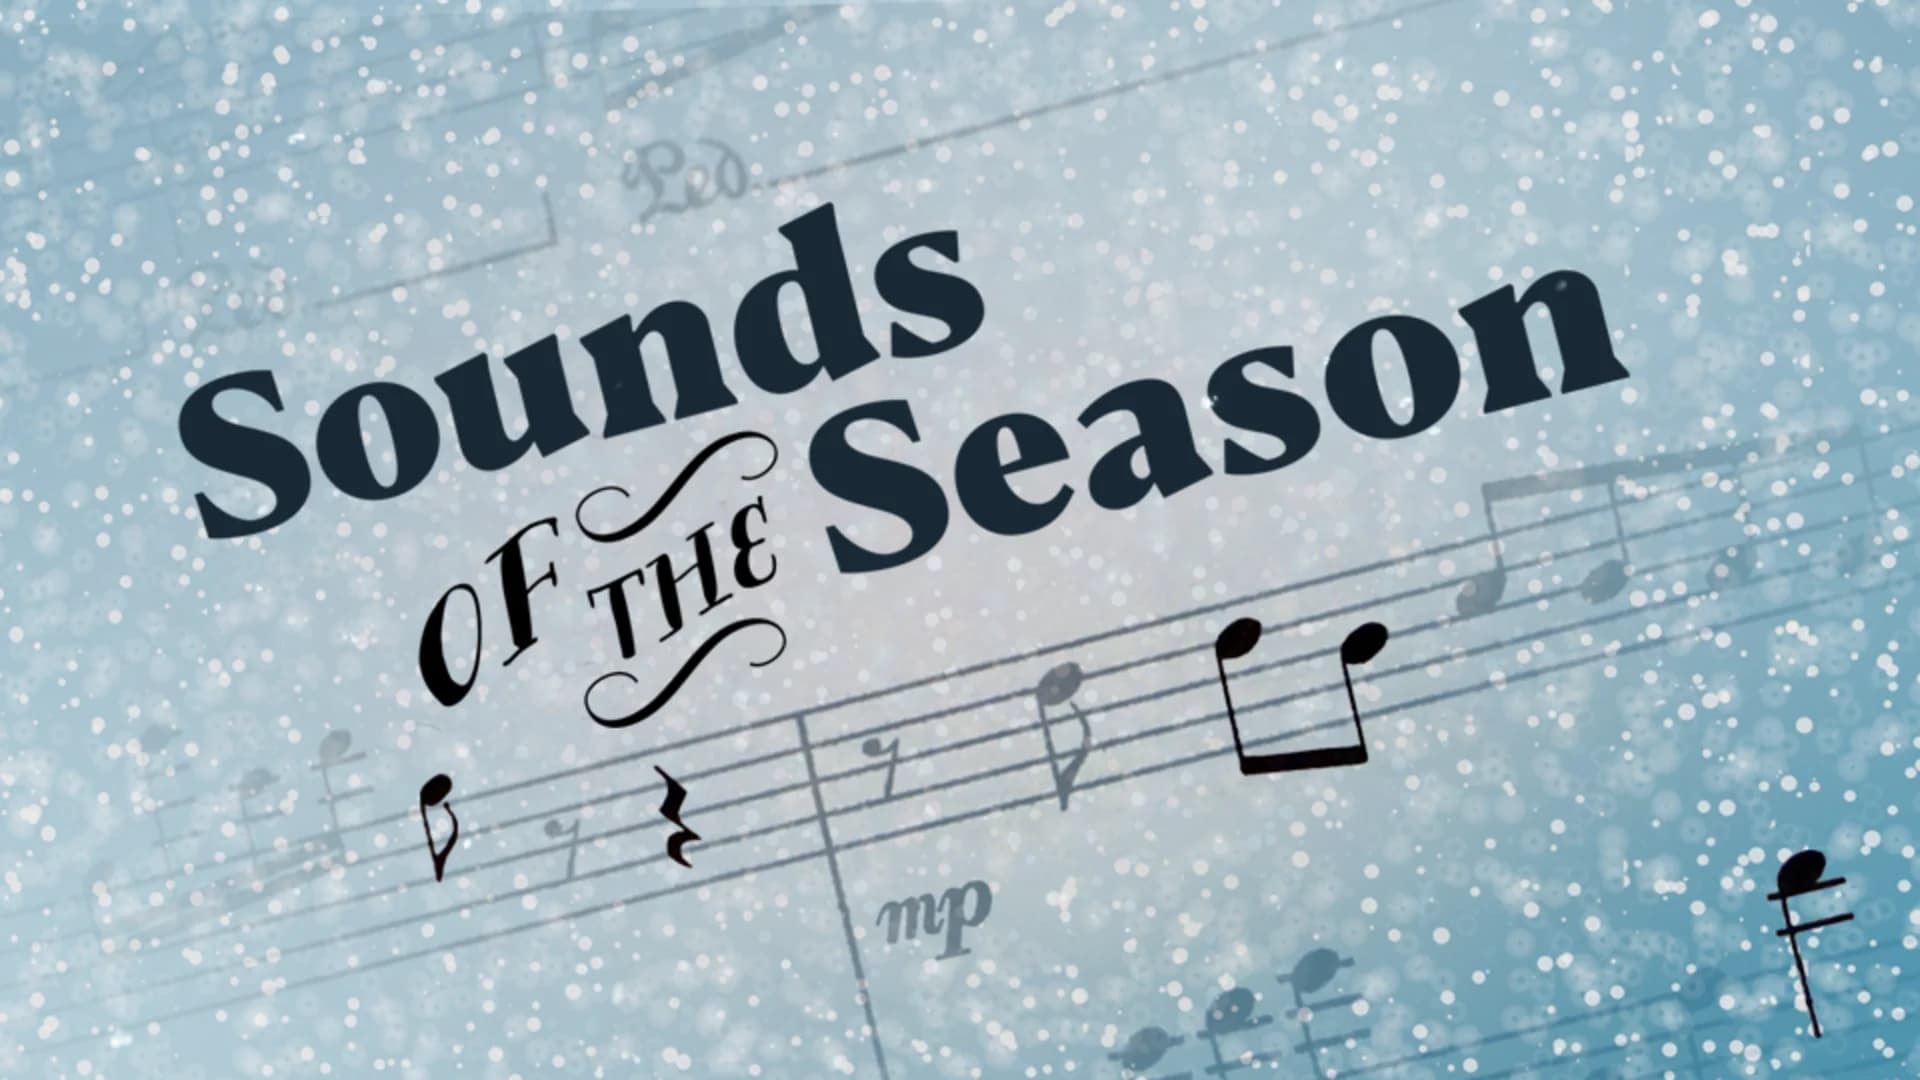 Sounds of the Season voting ends in the Bronx